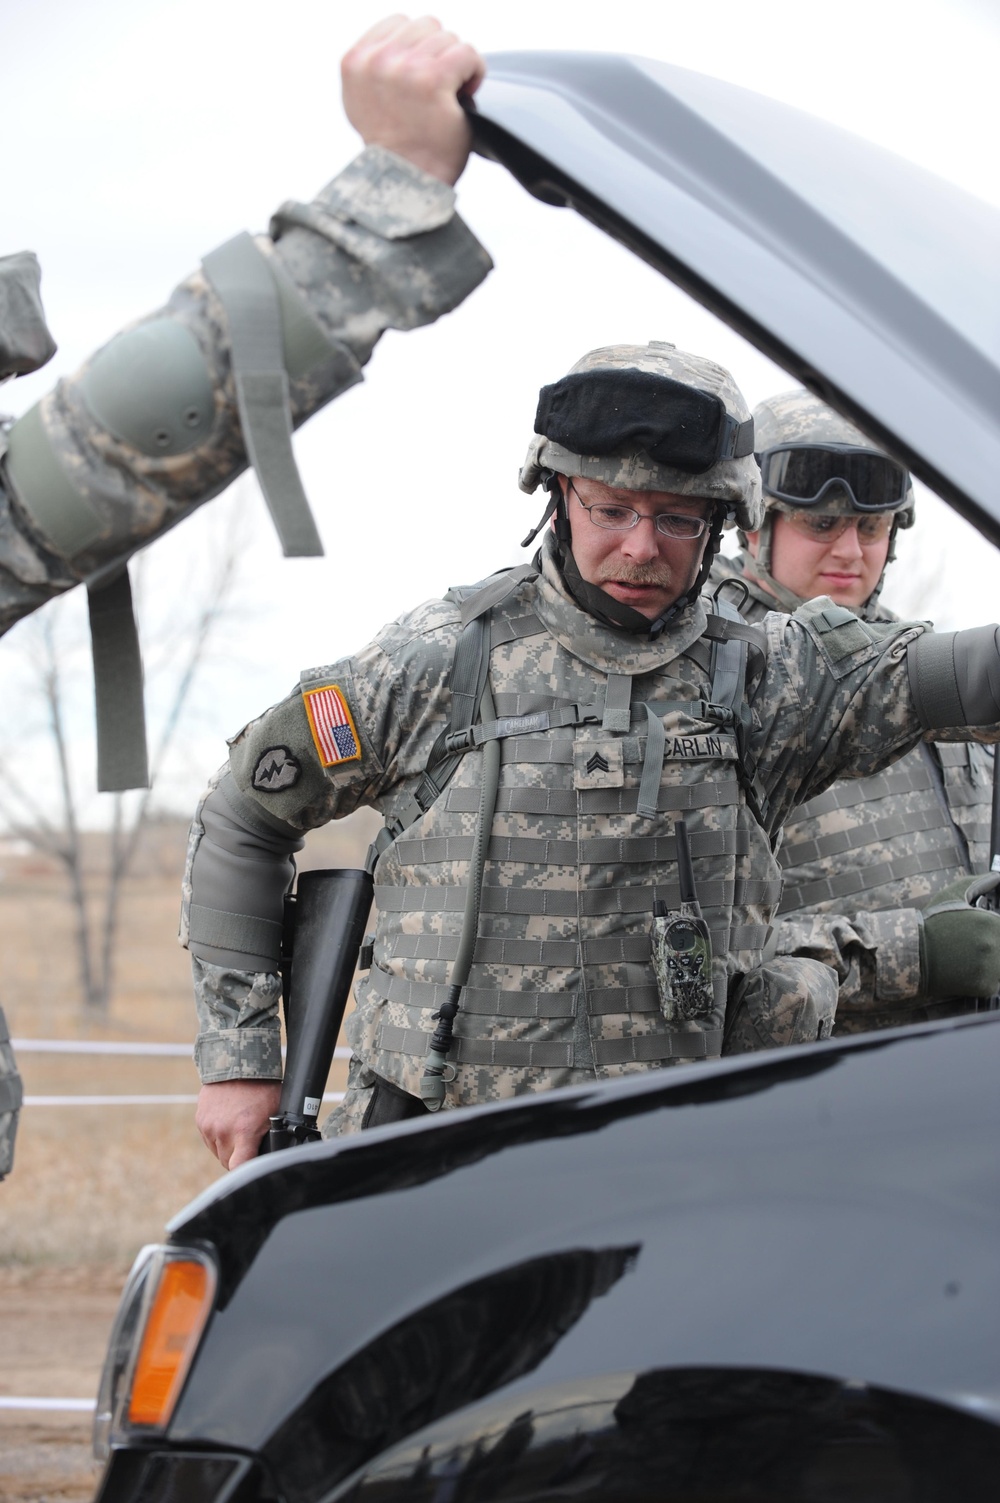 Sgt. Shawn M. Carlin with the South Dakota Army National Guard's 842nd Engineer Company inspects the engine of a vehicle while conducting an Entry Control Point training scenario